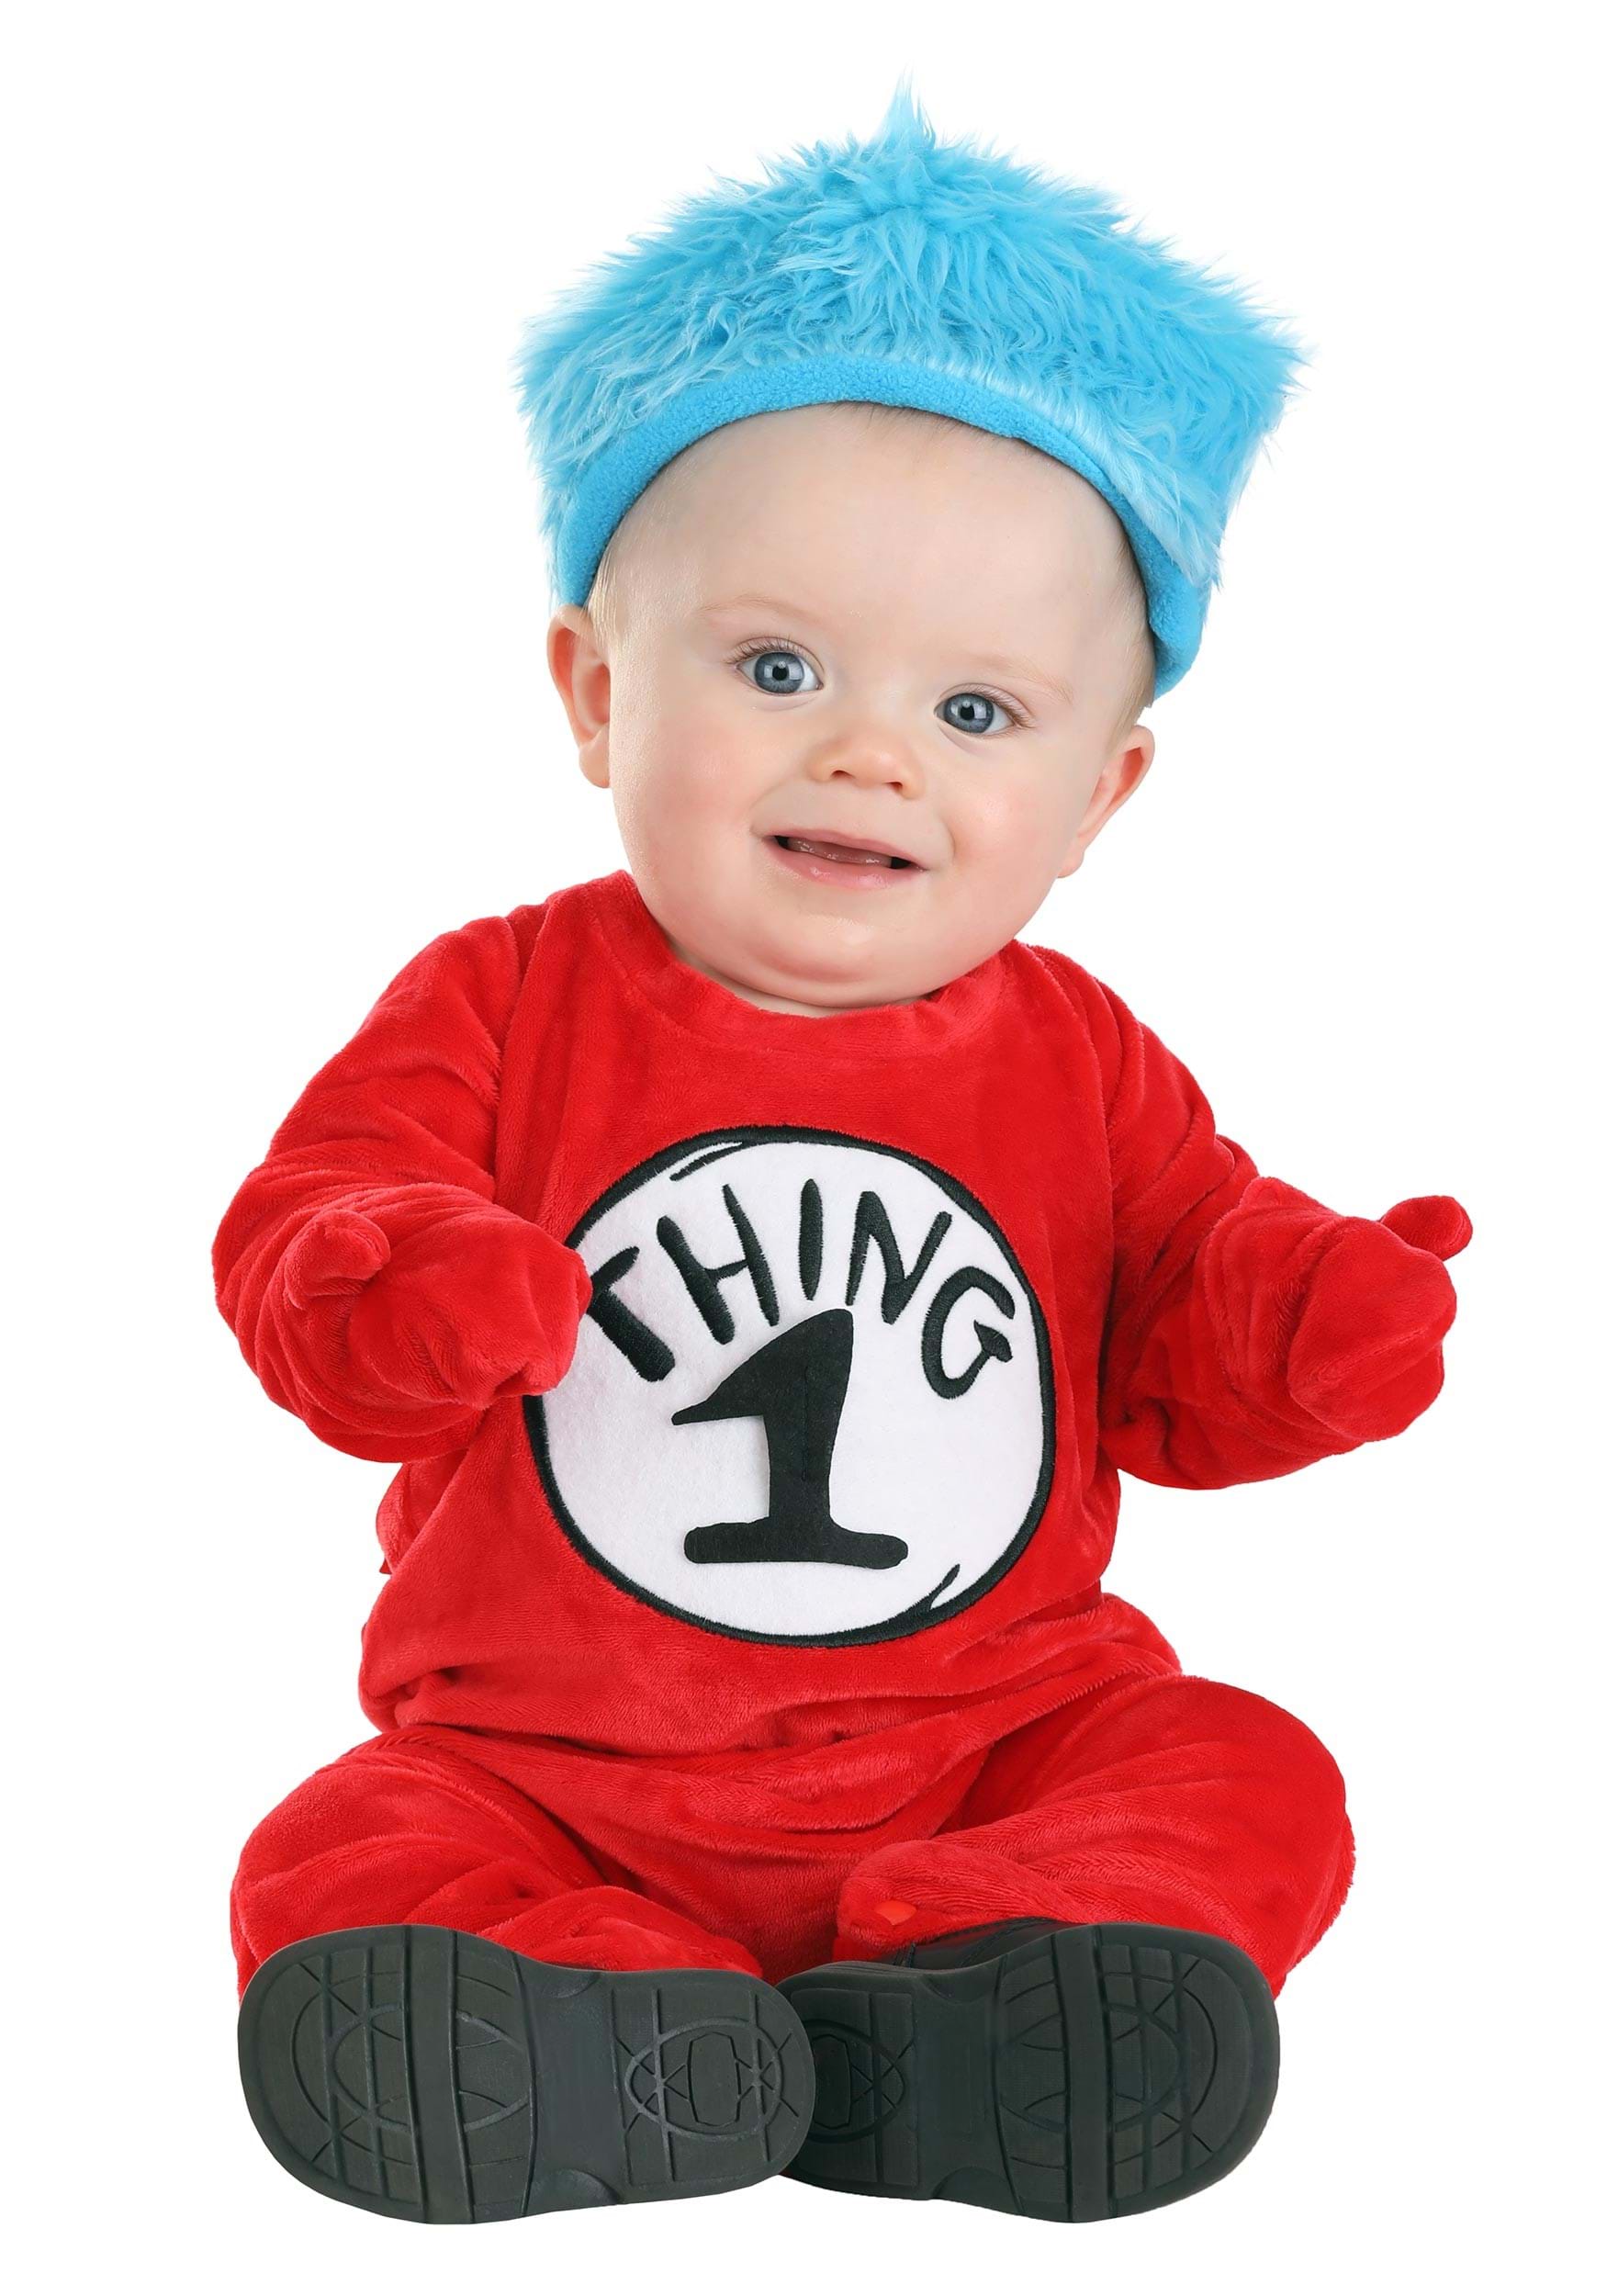 Infant Thing 1 and 2 Costume